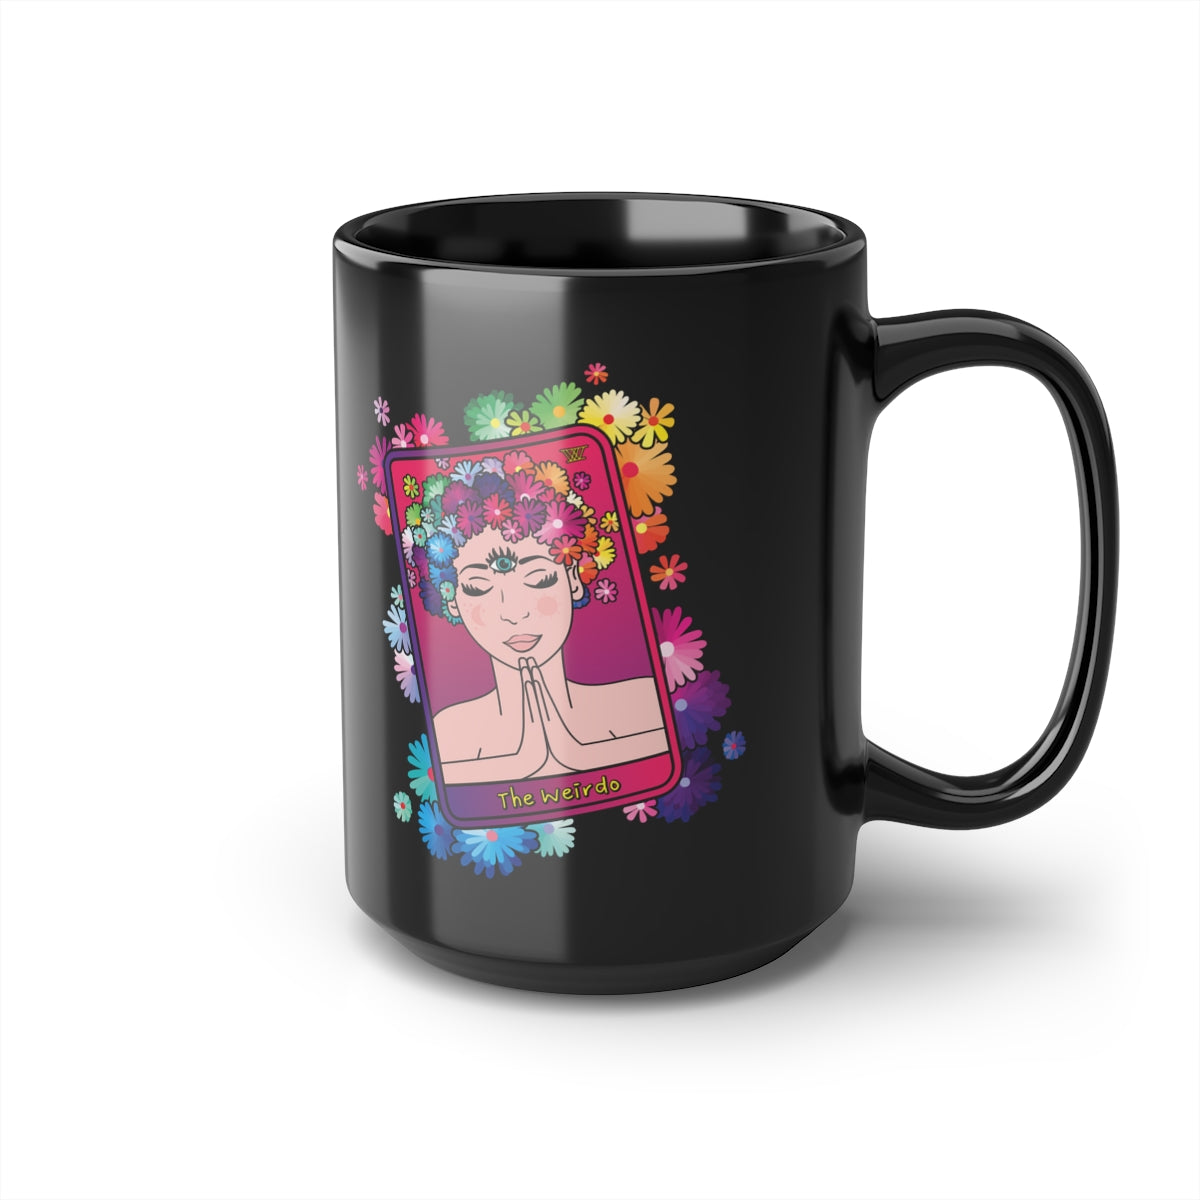 WEIRDO | are you into spirituality? tarot cards? do you consider yourself a weirdo? like coffee or tea? Then this mug is a must have for you! This black mug has THE WEIRDO tarot card visible on both sides of the mug.